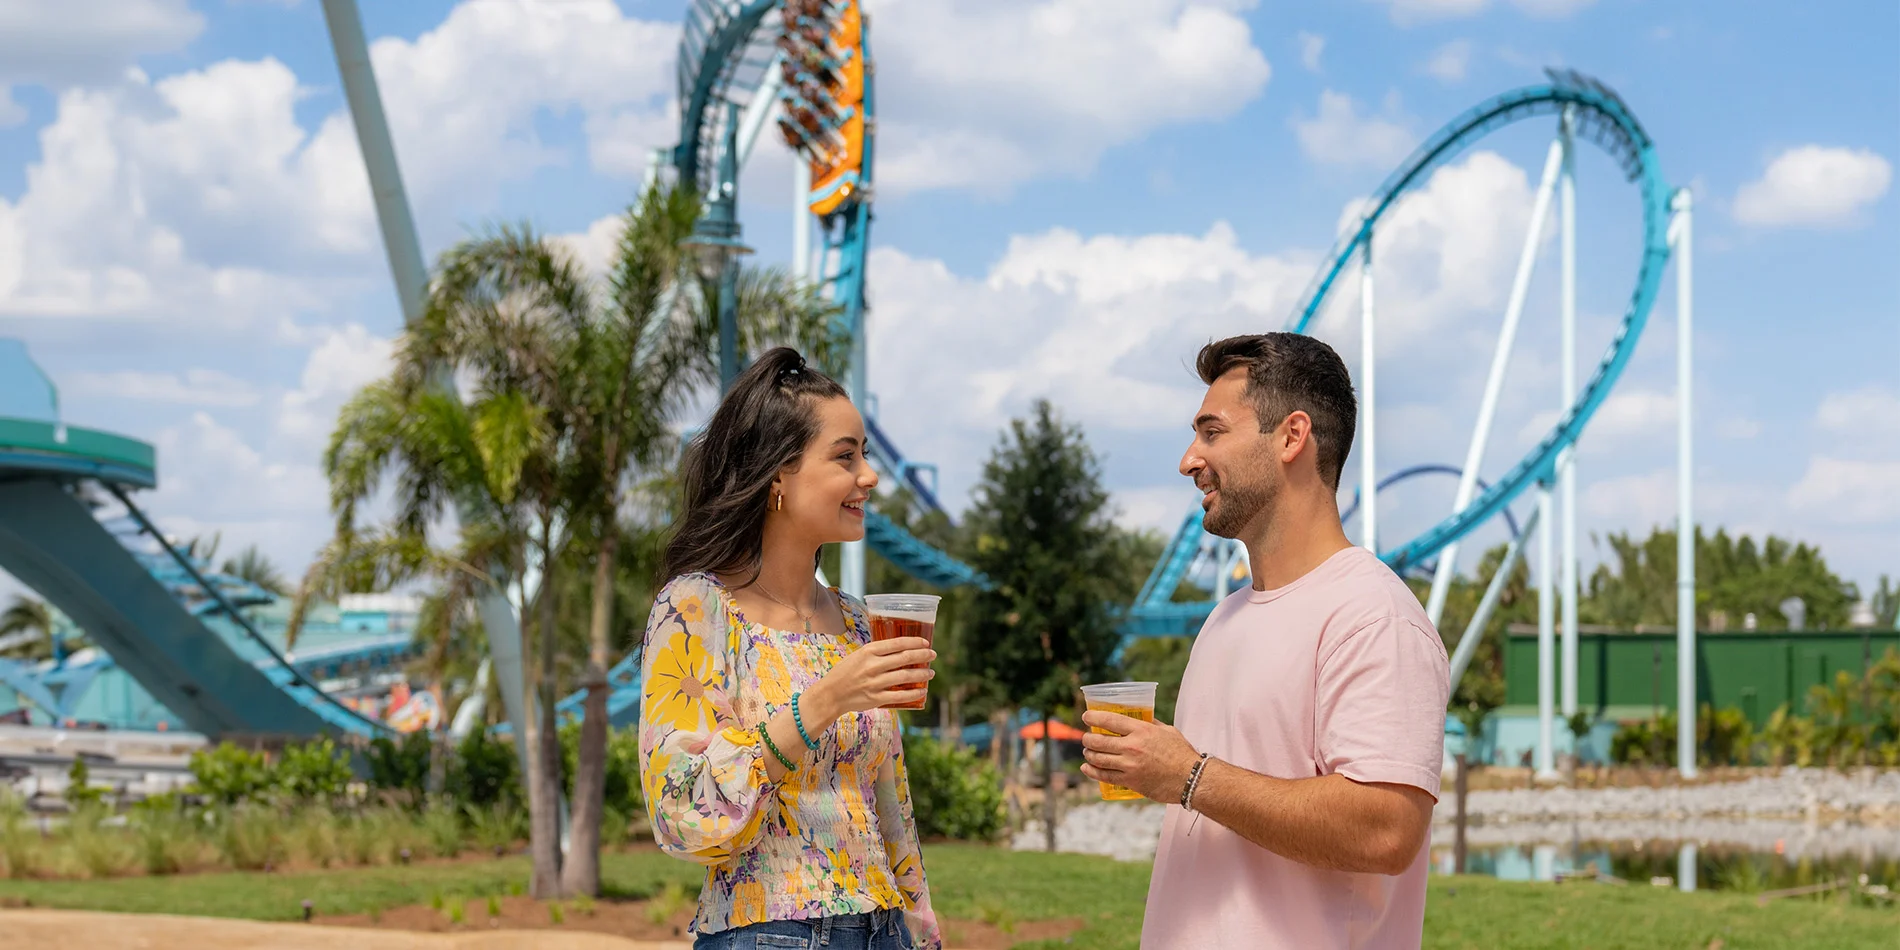 two people drinking beer in front of a rollercoaster